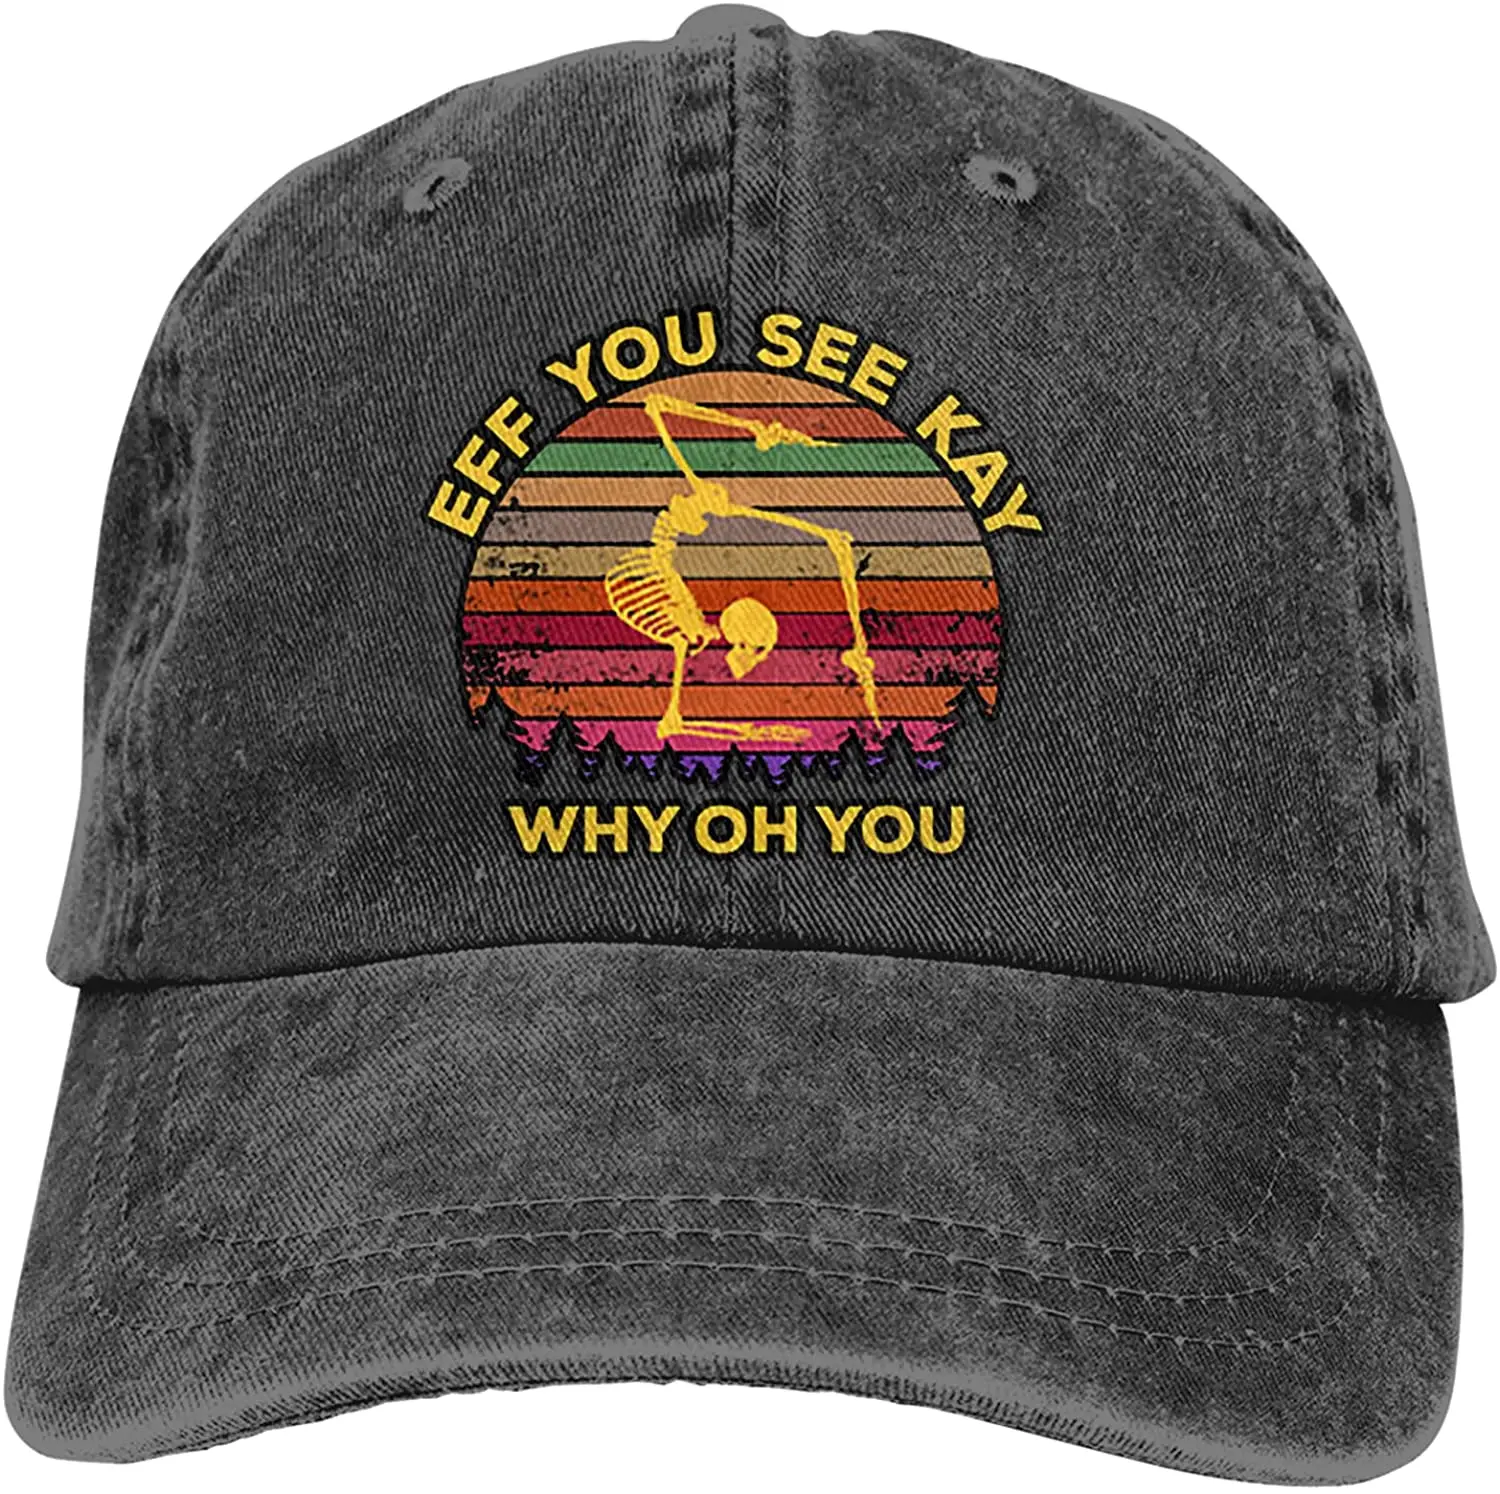 

Eff You See Kay Why Oh You Cowboy Hat, Classic Farmer Baseball Cap, Neutral Print Outdoor Trucker Mountaineering Hat Black